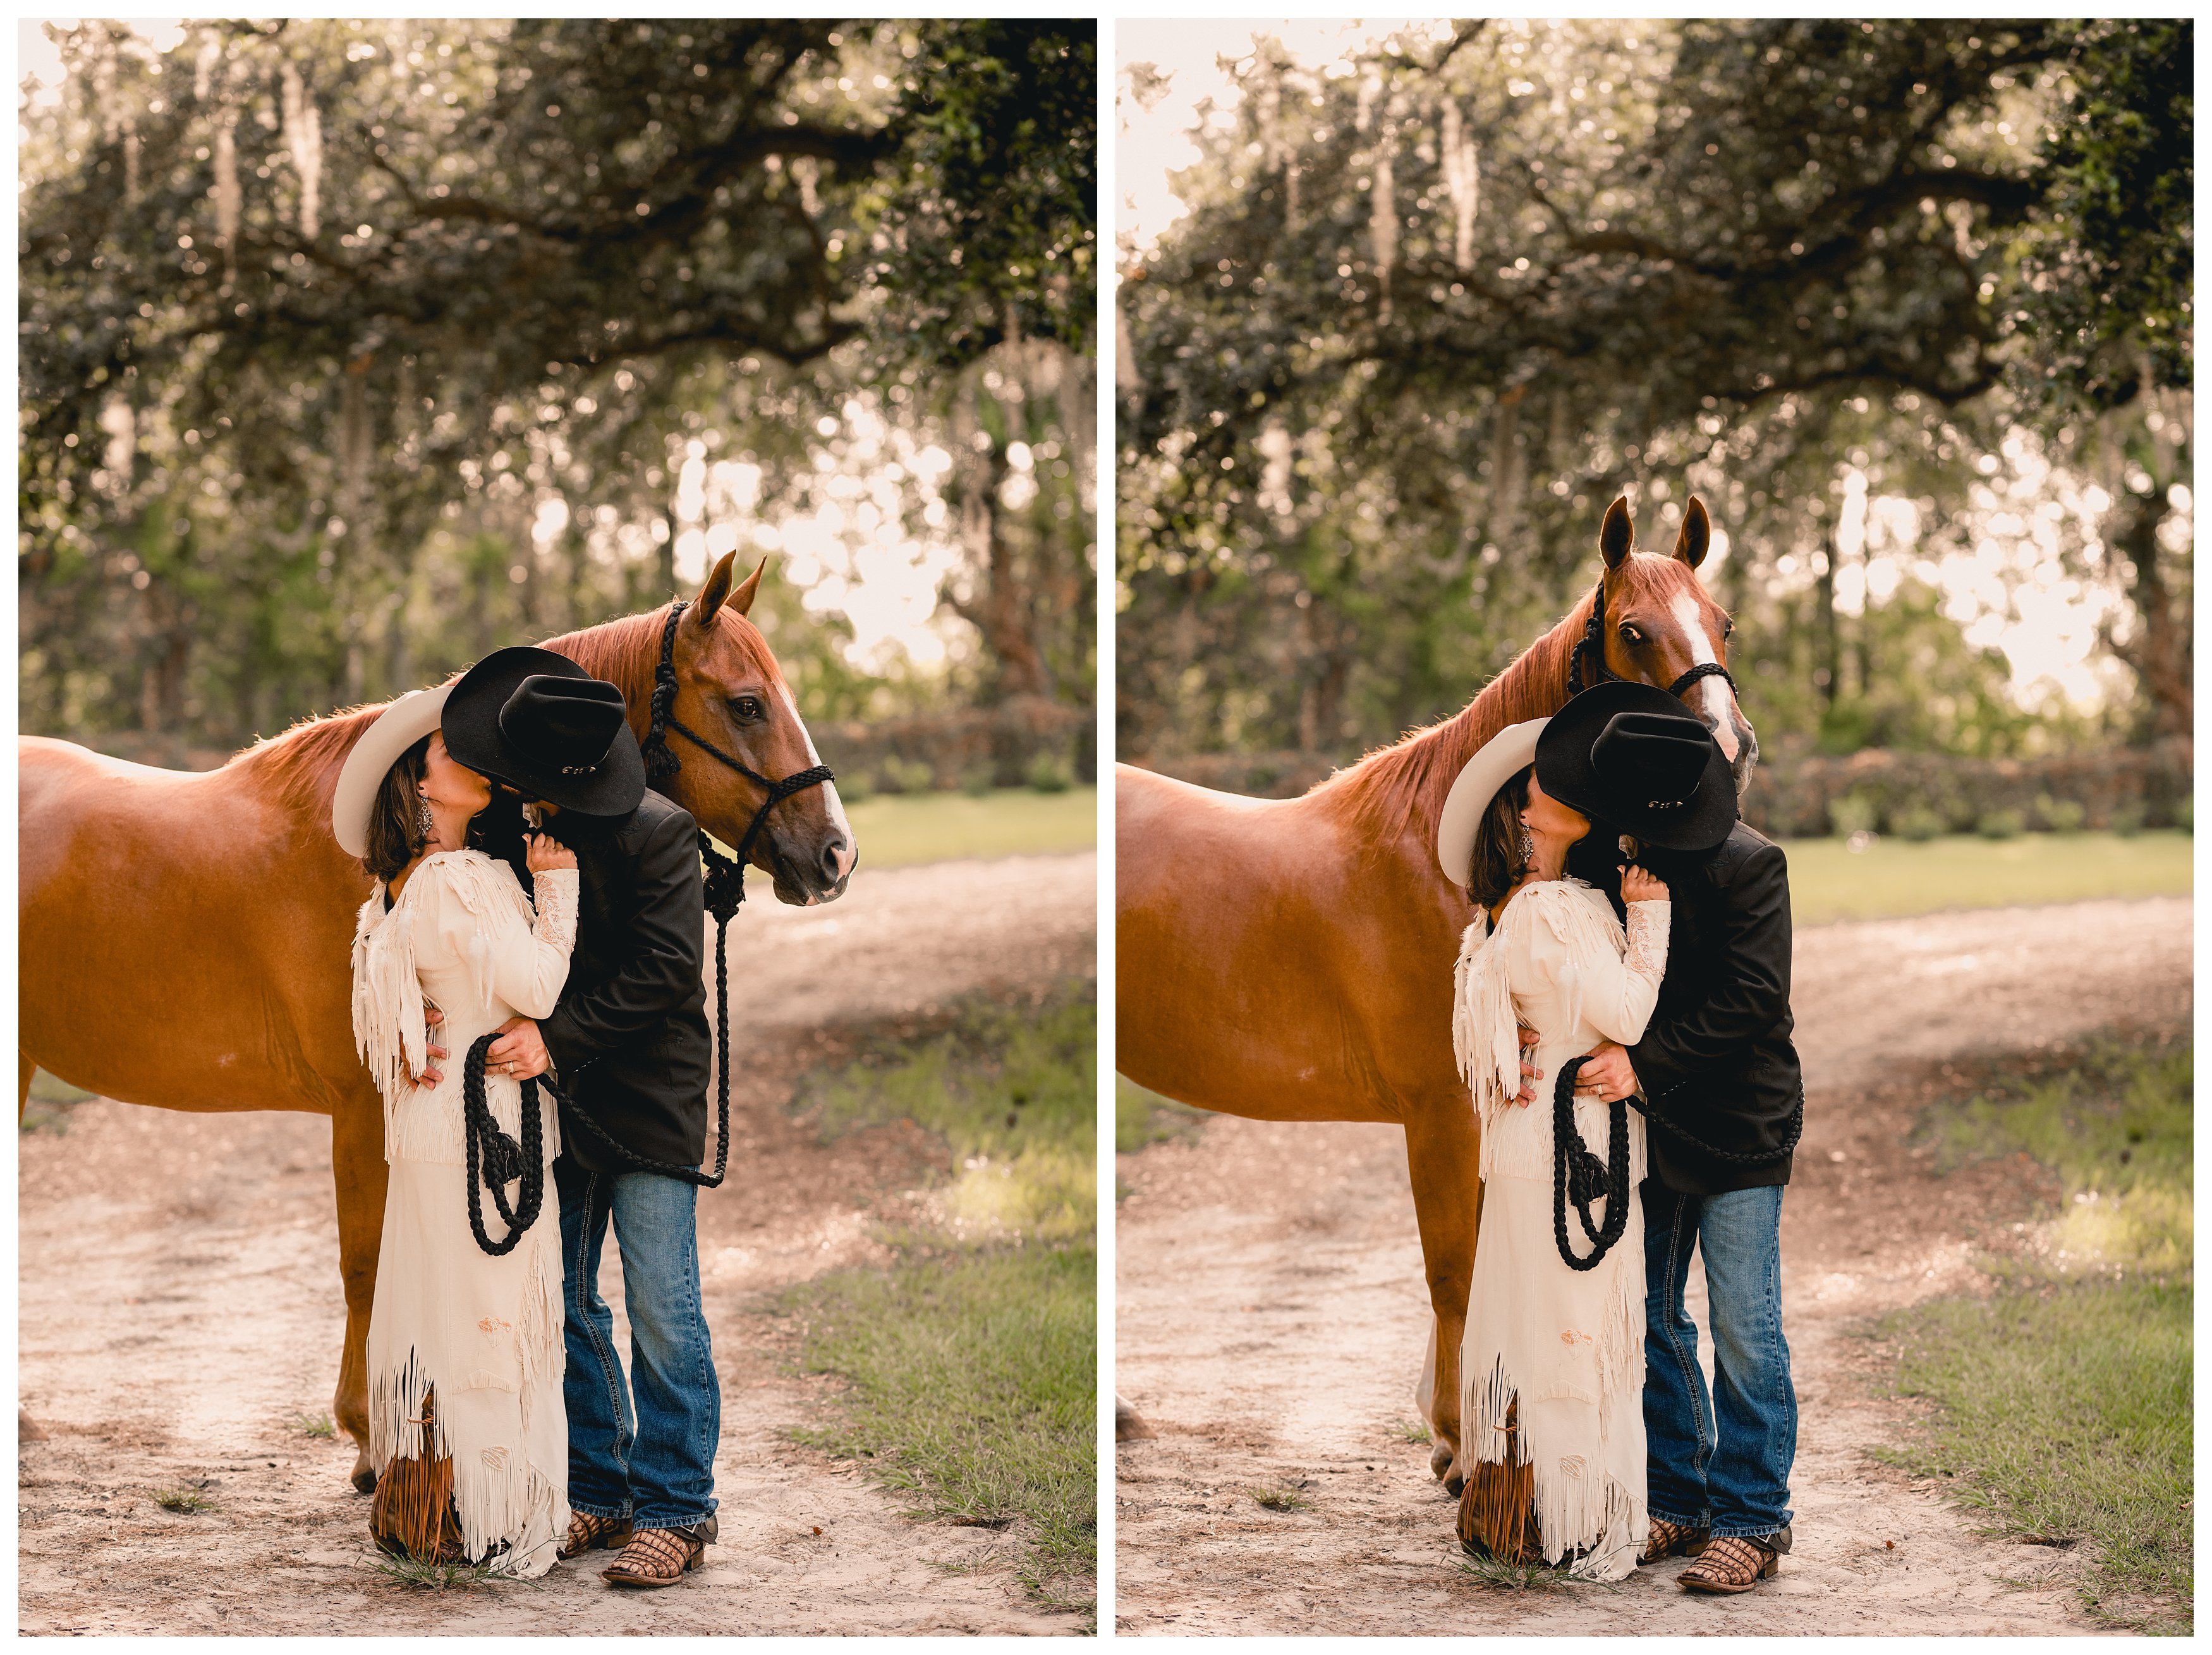 Western couple photos taken with a horse in Gainesville, FL.